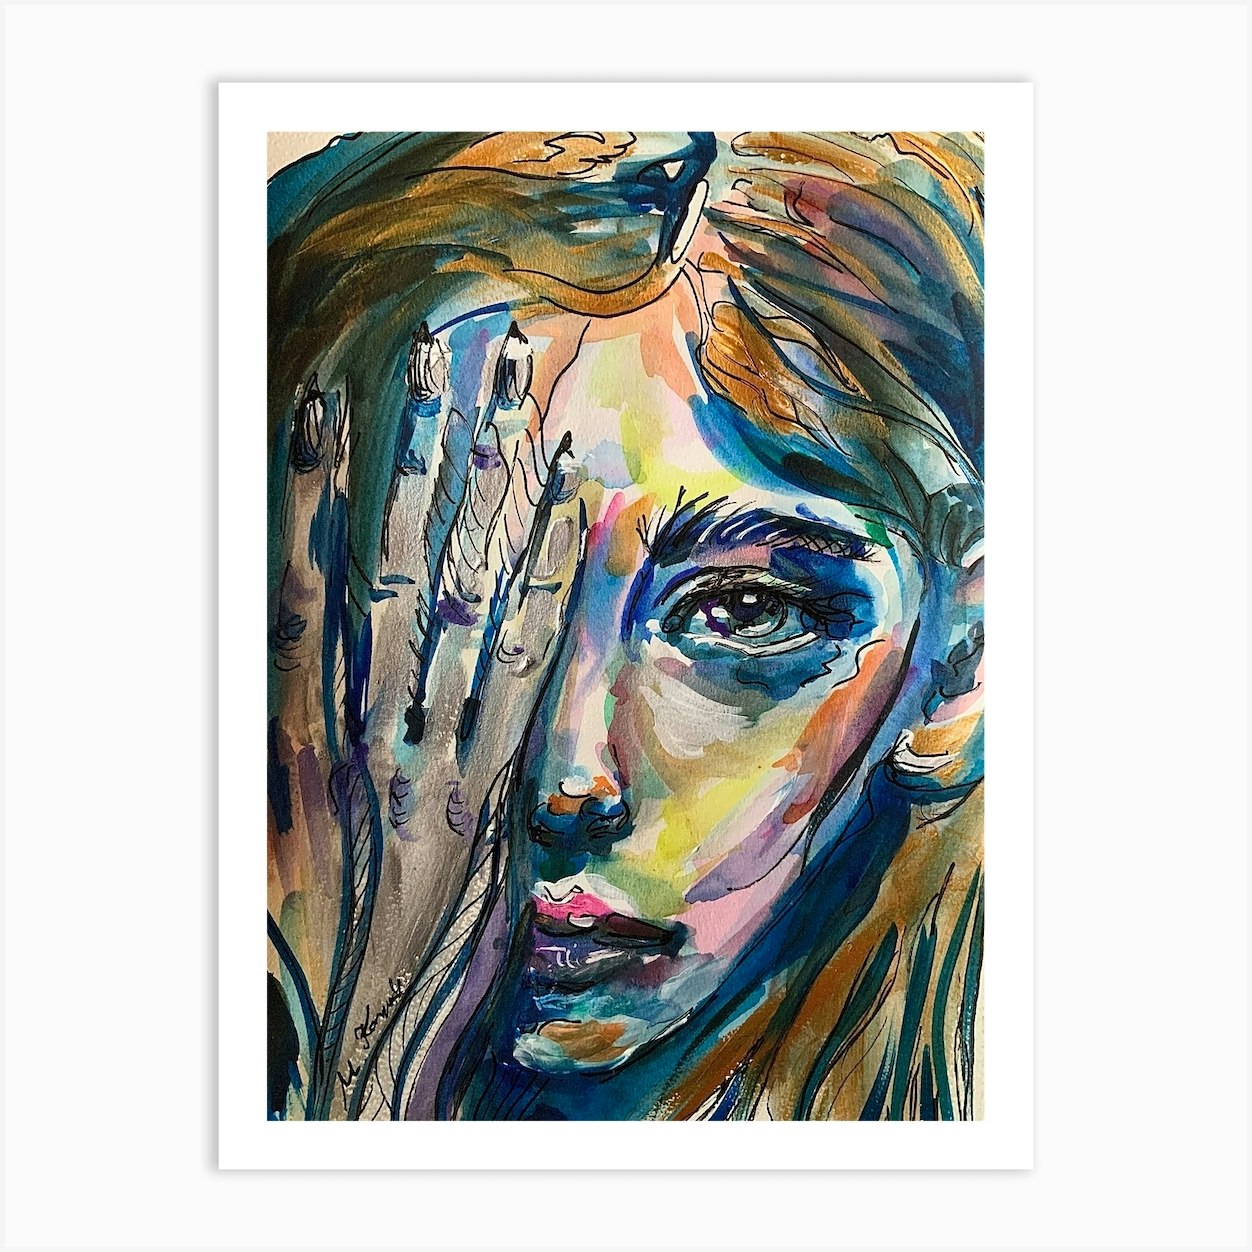 Wall Art Print, Expressive Woman face in Oil Painting, Abstract Portrait